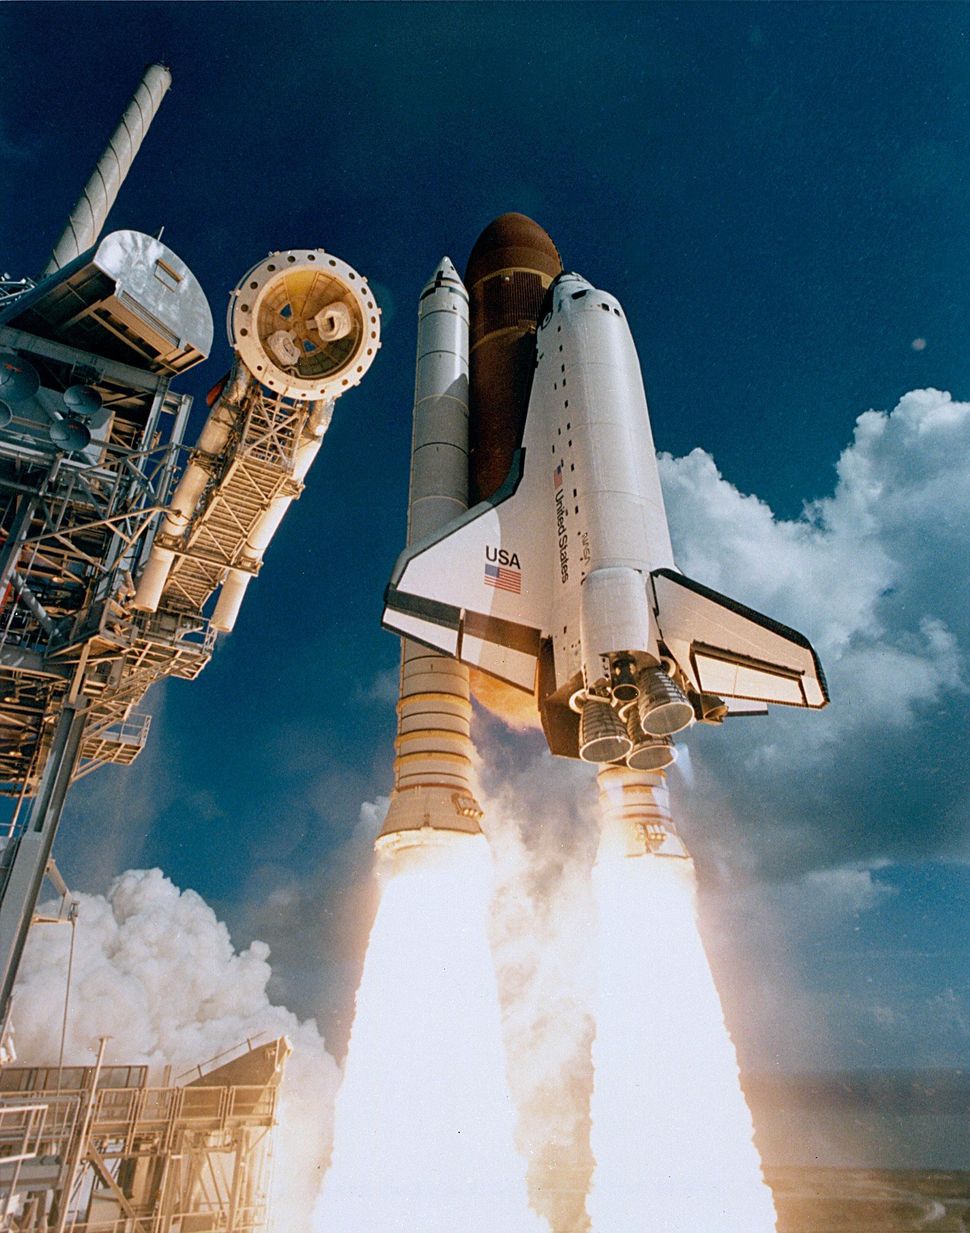 NASA's space shuttle program in pictures A tribute Space